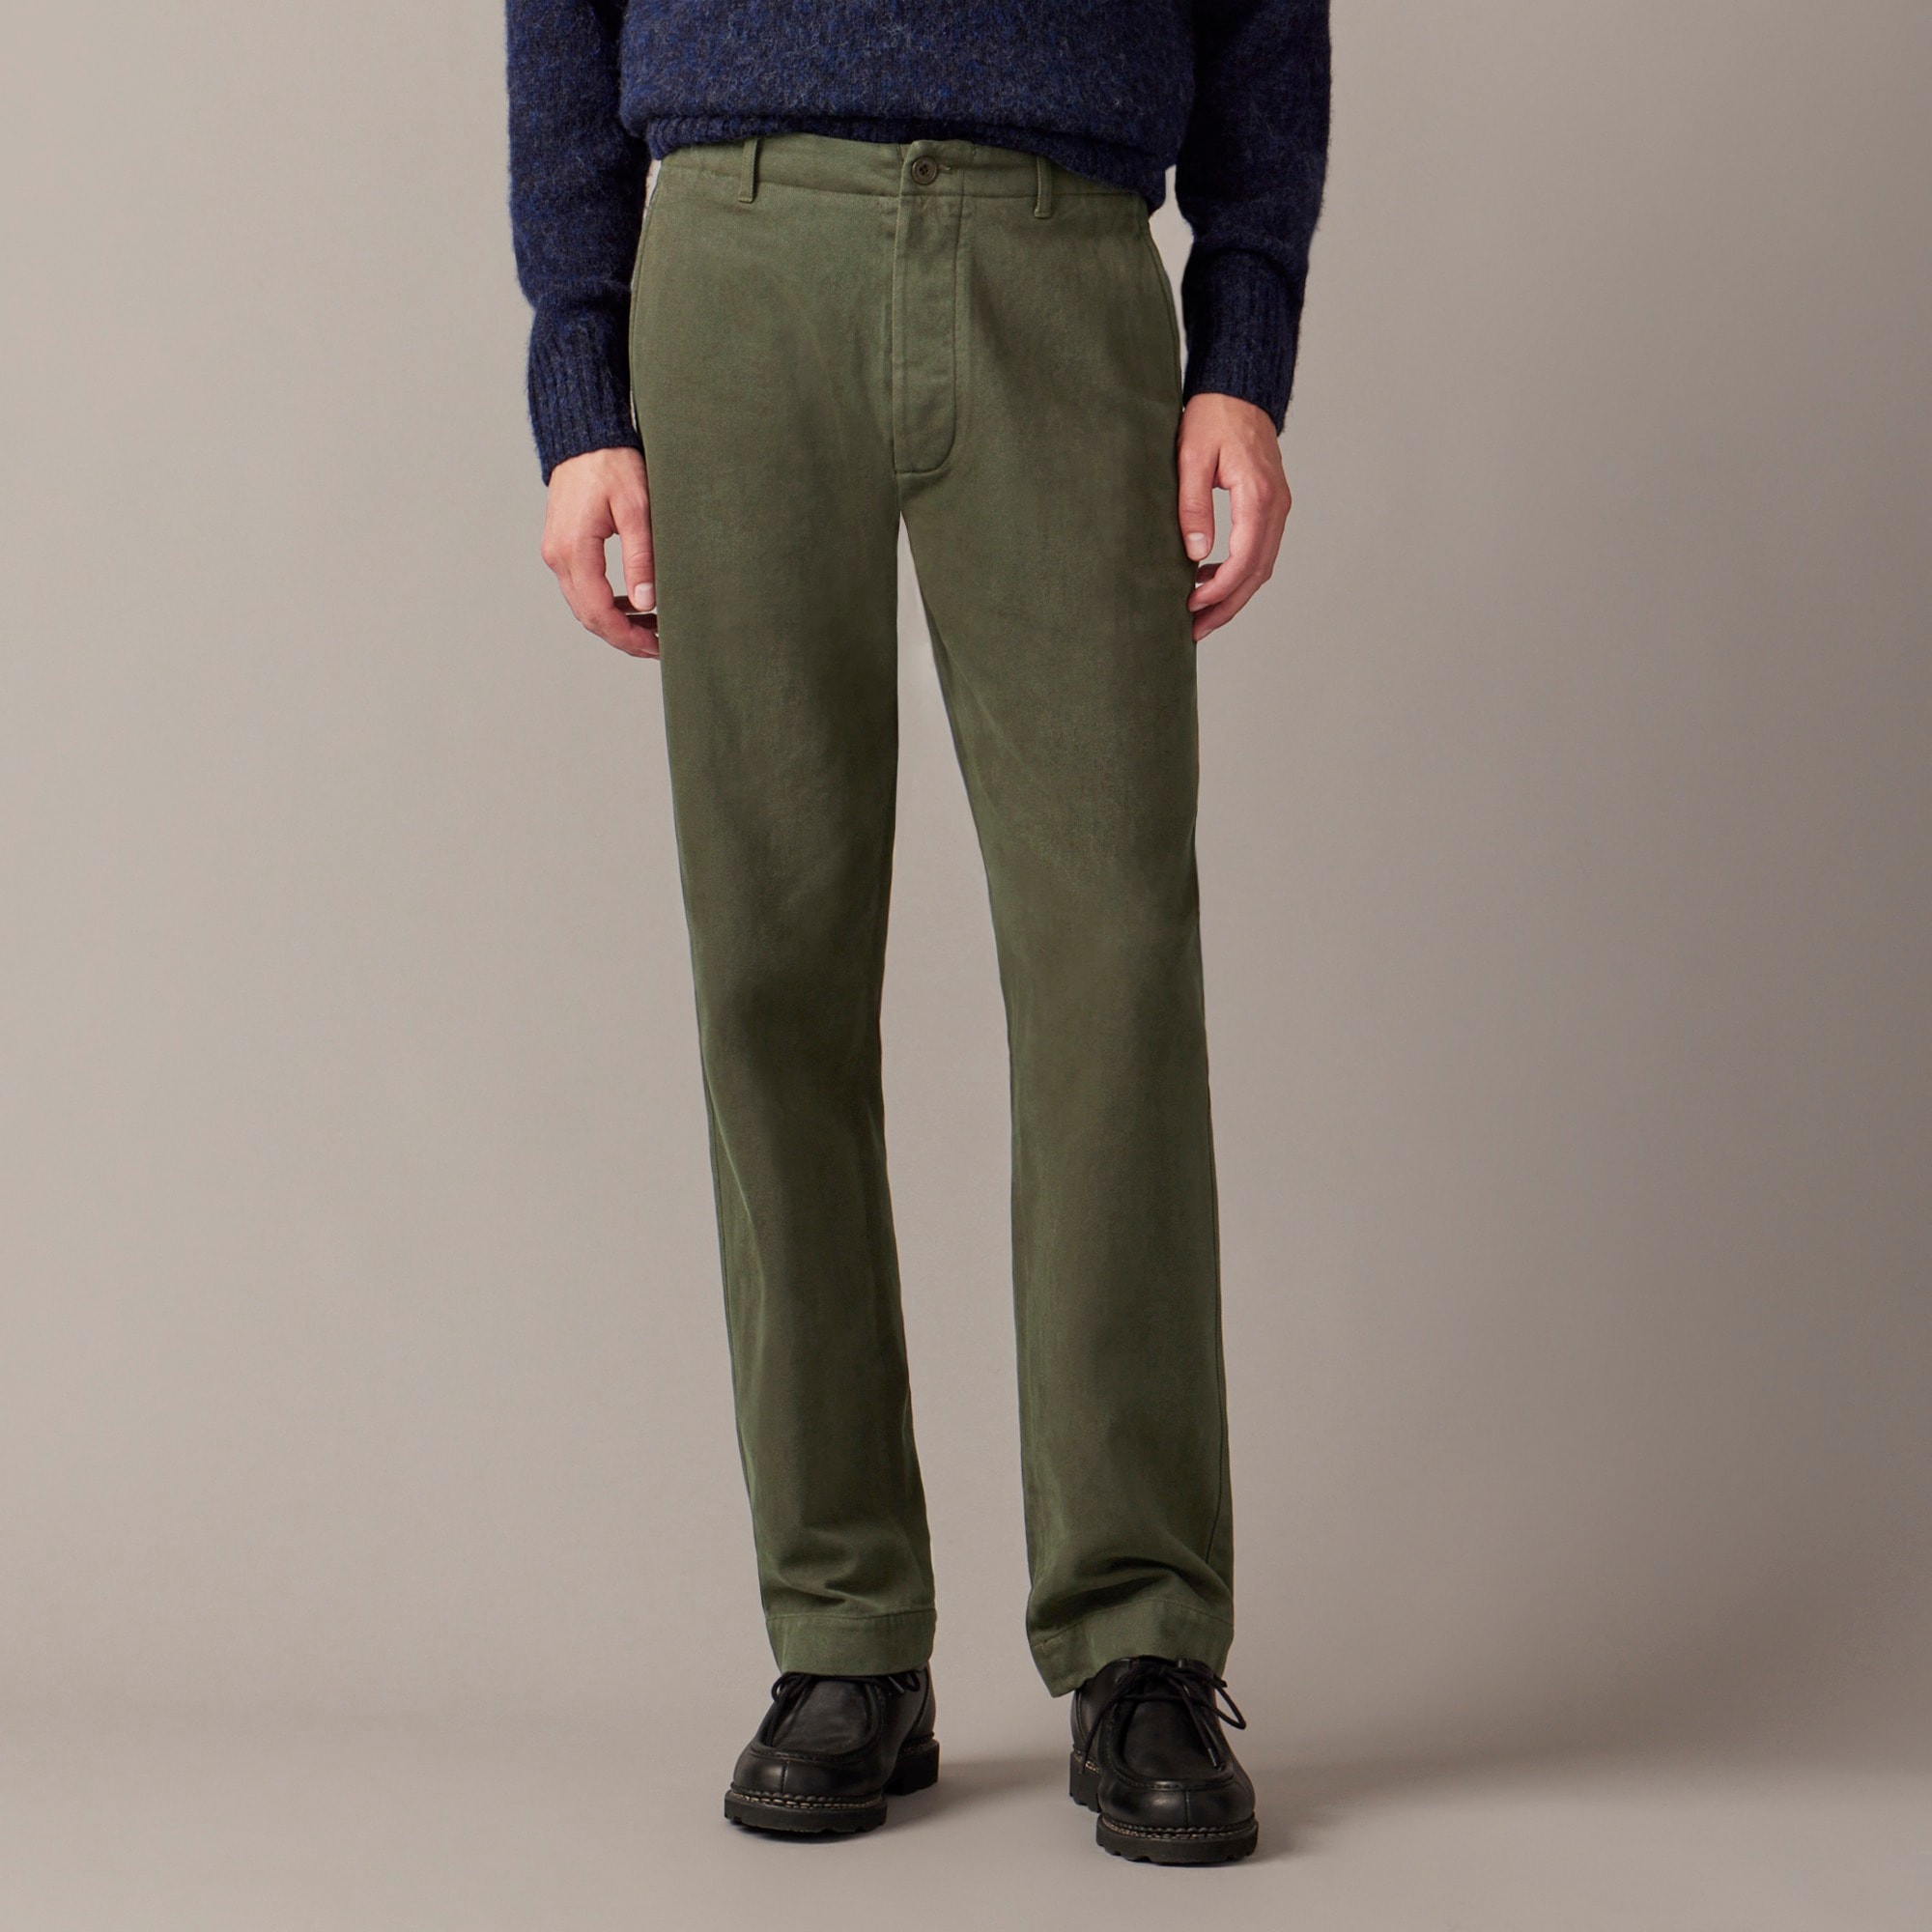 mens Garment-dyed suit pant in Italian cotton drill